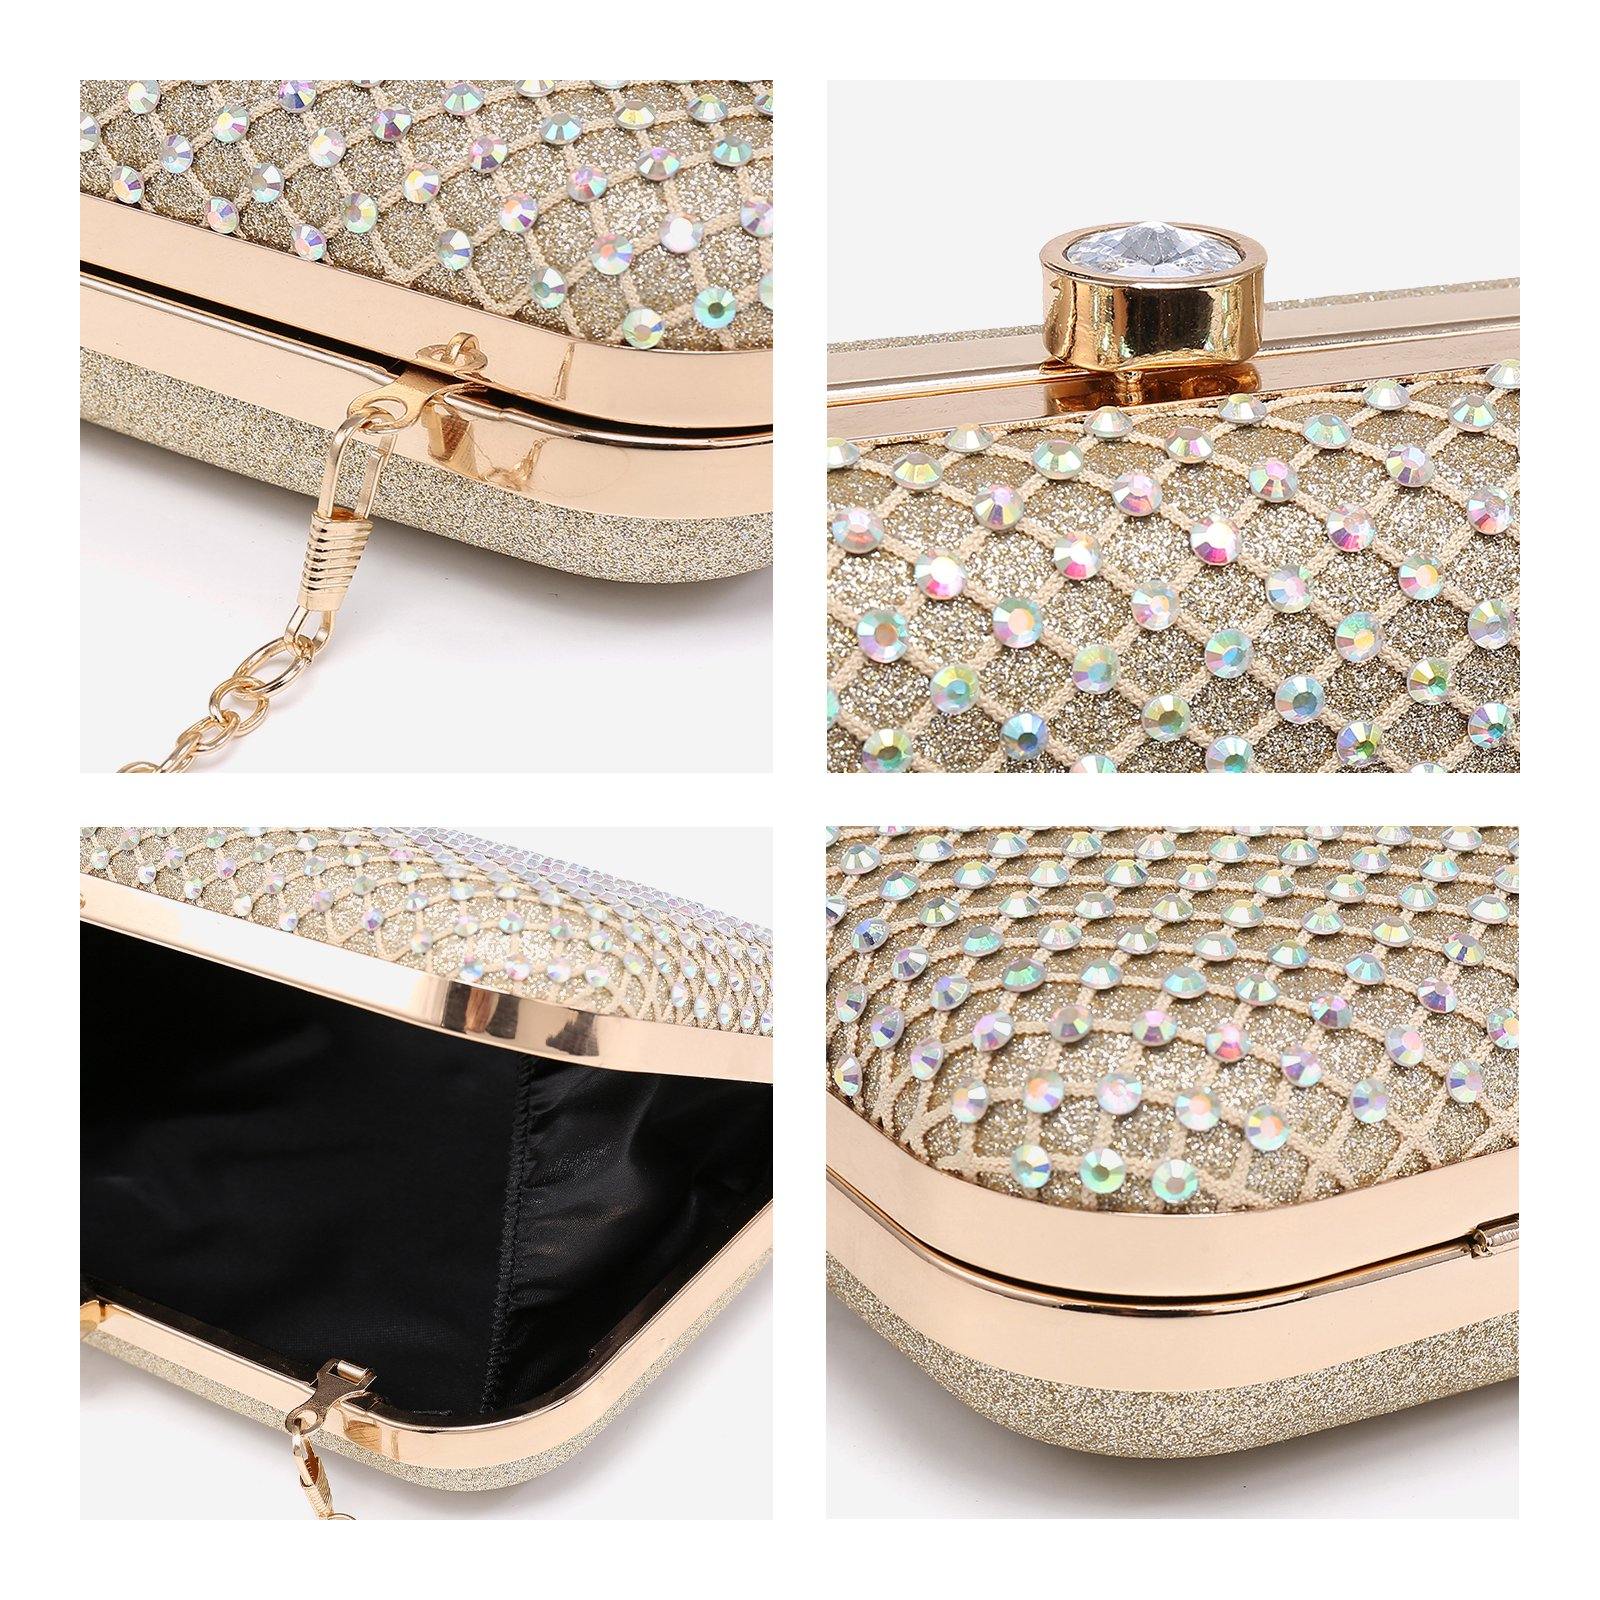 TIAASTAP Evening Bags for Women Pearl Handbags Leather Clutch Bag Sparkly  Crossbody Bags Bridal Clutch Purses for Wedding Party Prom